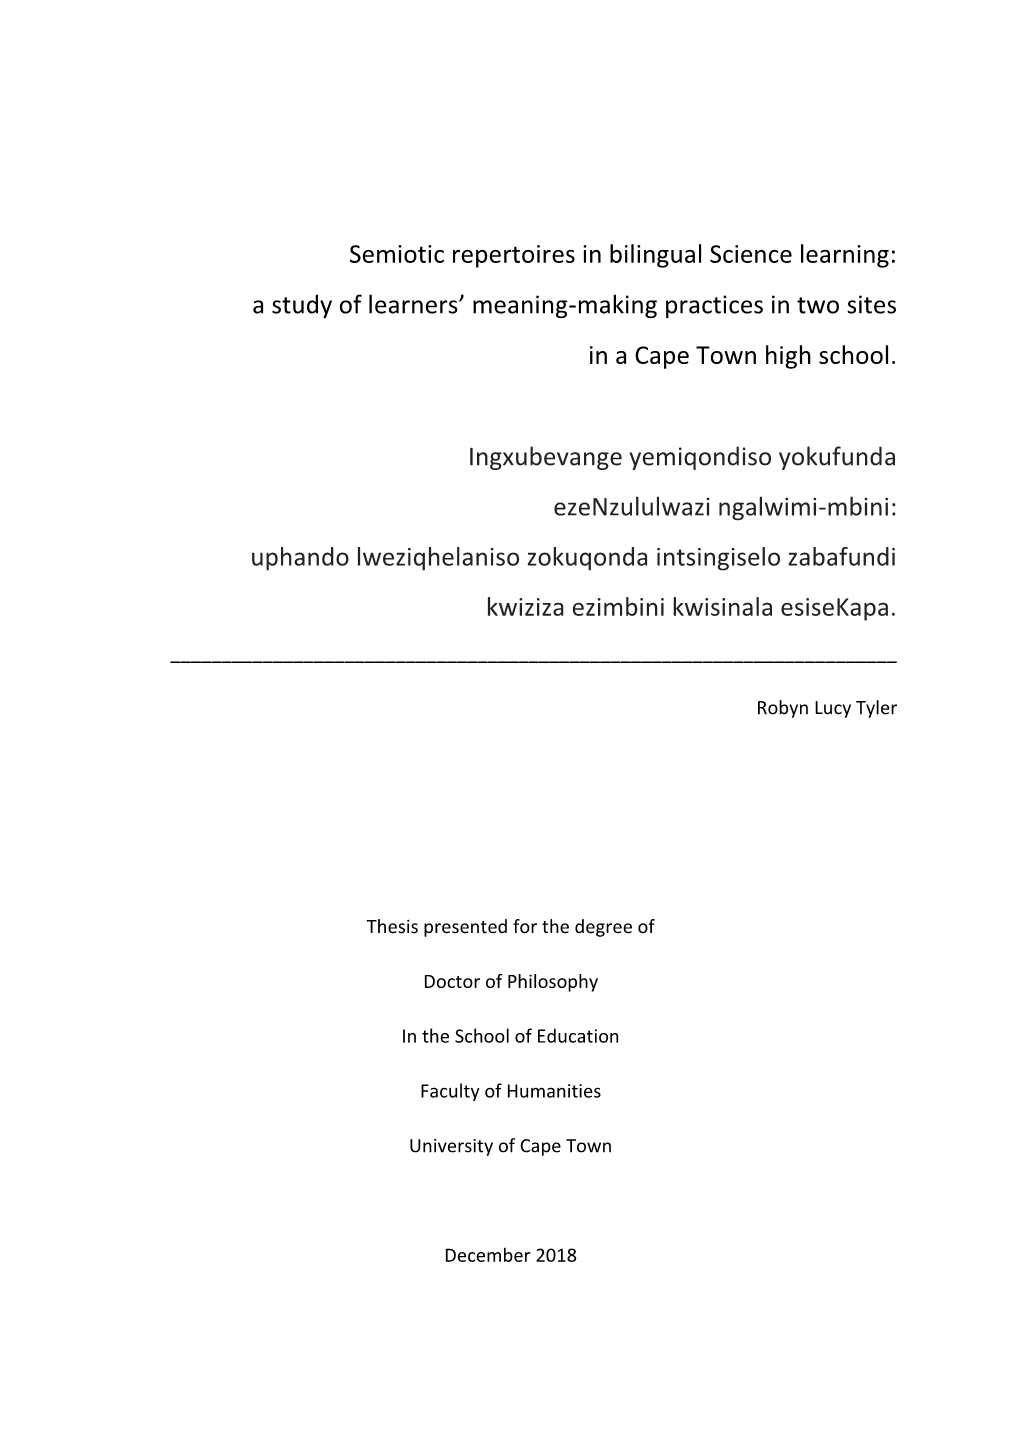 Semiotic Repertoires in Bilingual Science Learning: a Study of Learners’ Meaning-Making Practices in Two Sites in a Cape Town High School